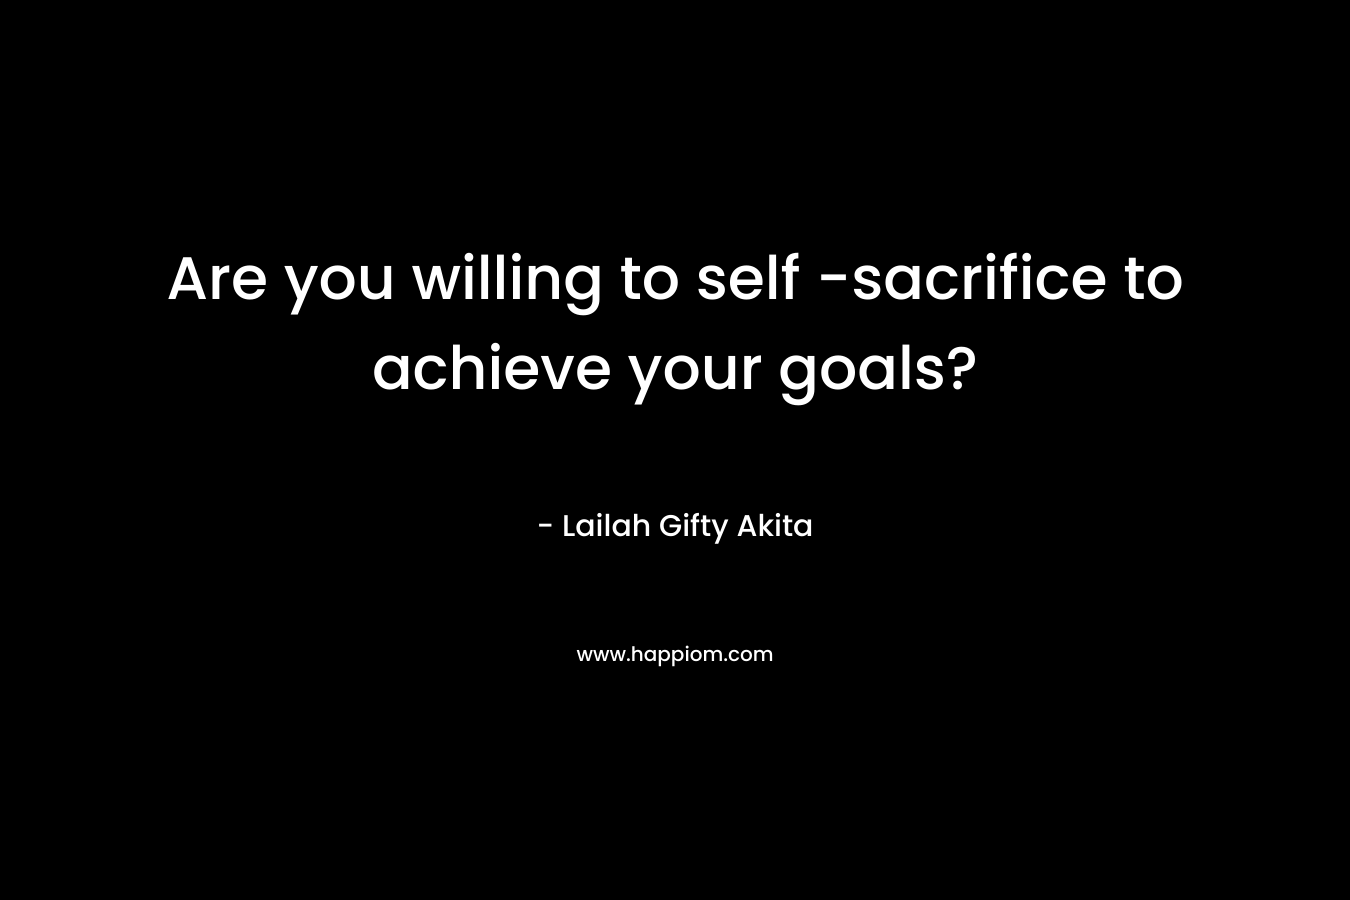 Are you willing to self -sacrifice to achieve your goals?